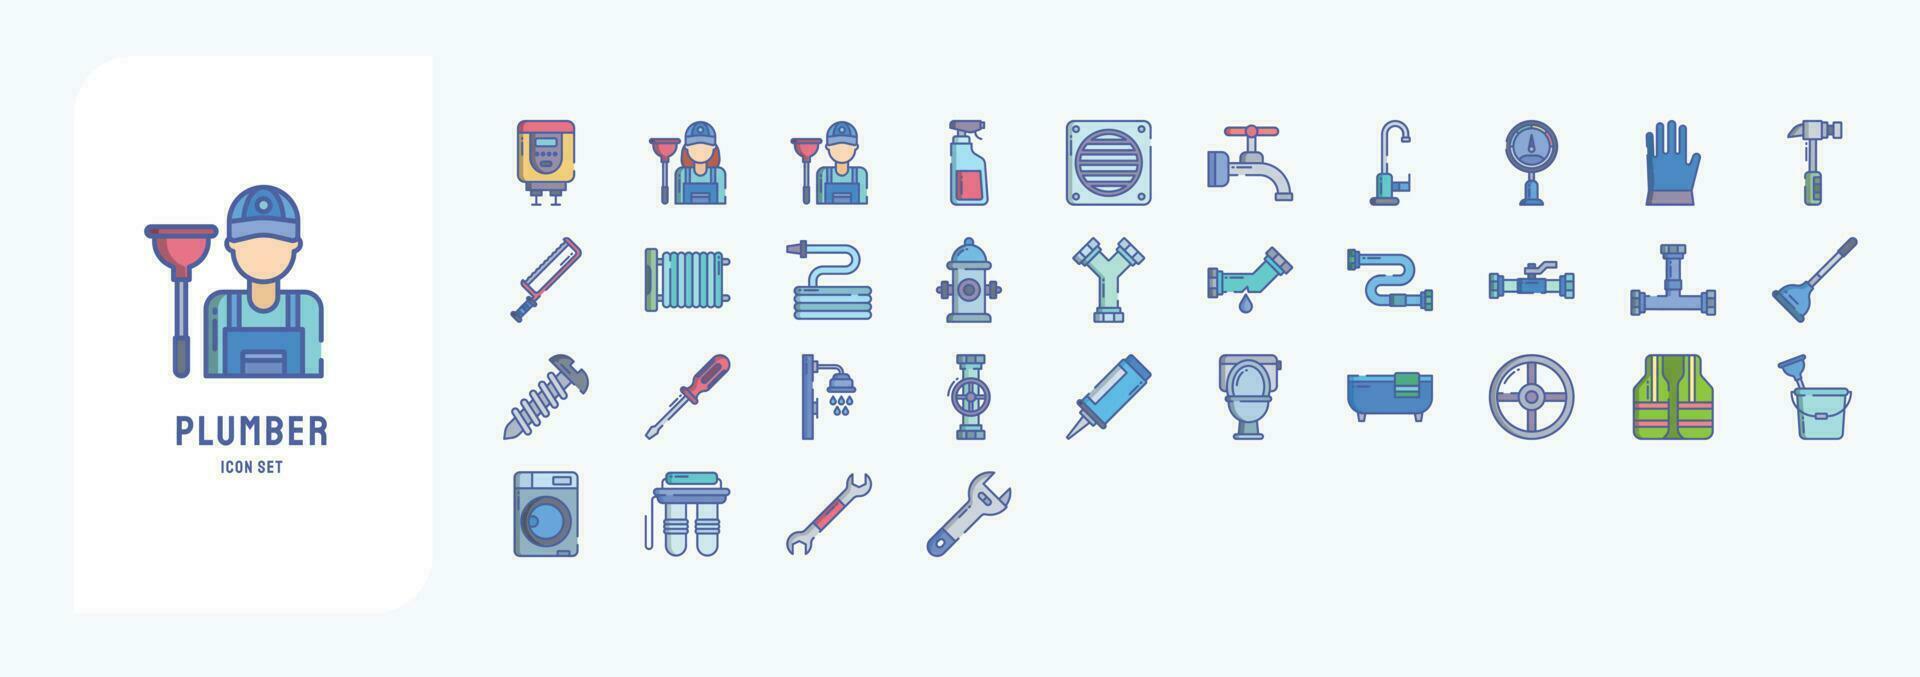 Collection of icons related to Plumber, including icons like Boiler, Cleaner, Faucet, Drainage and more vector